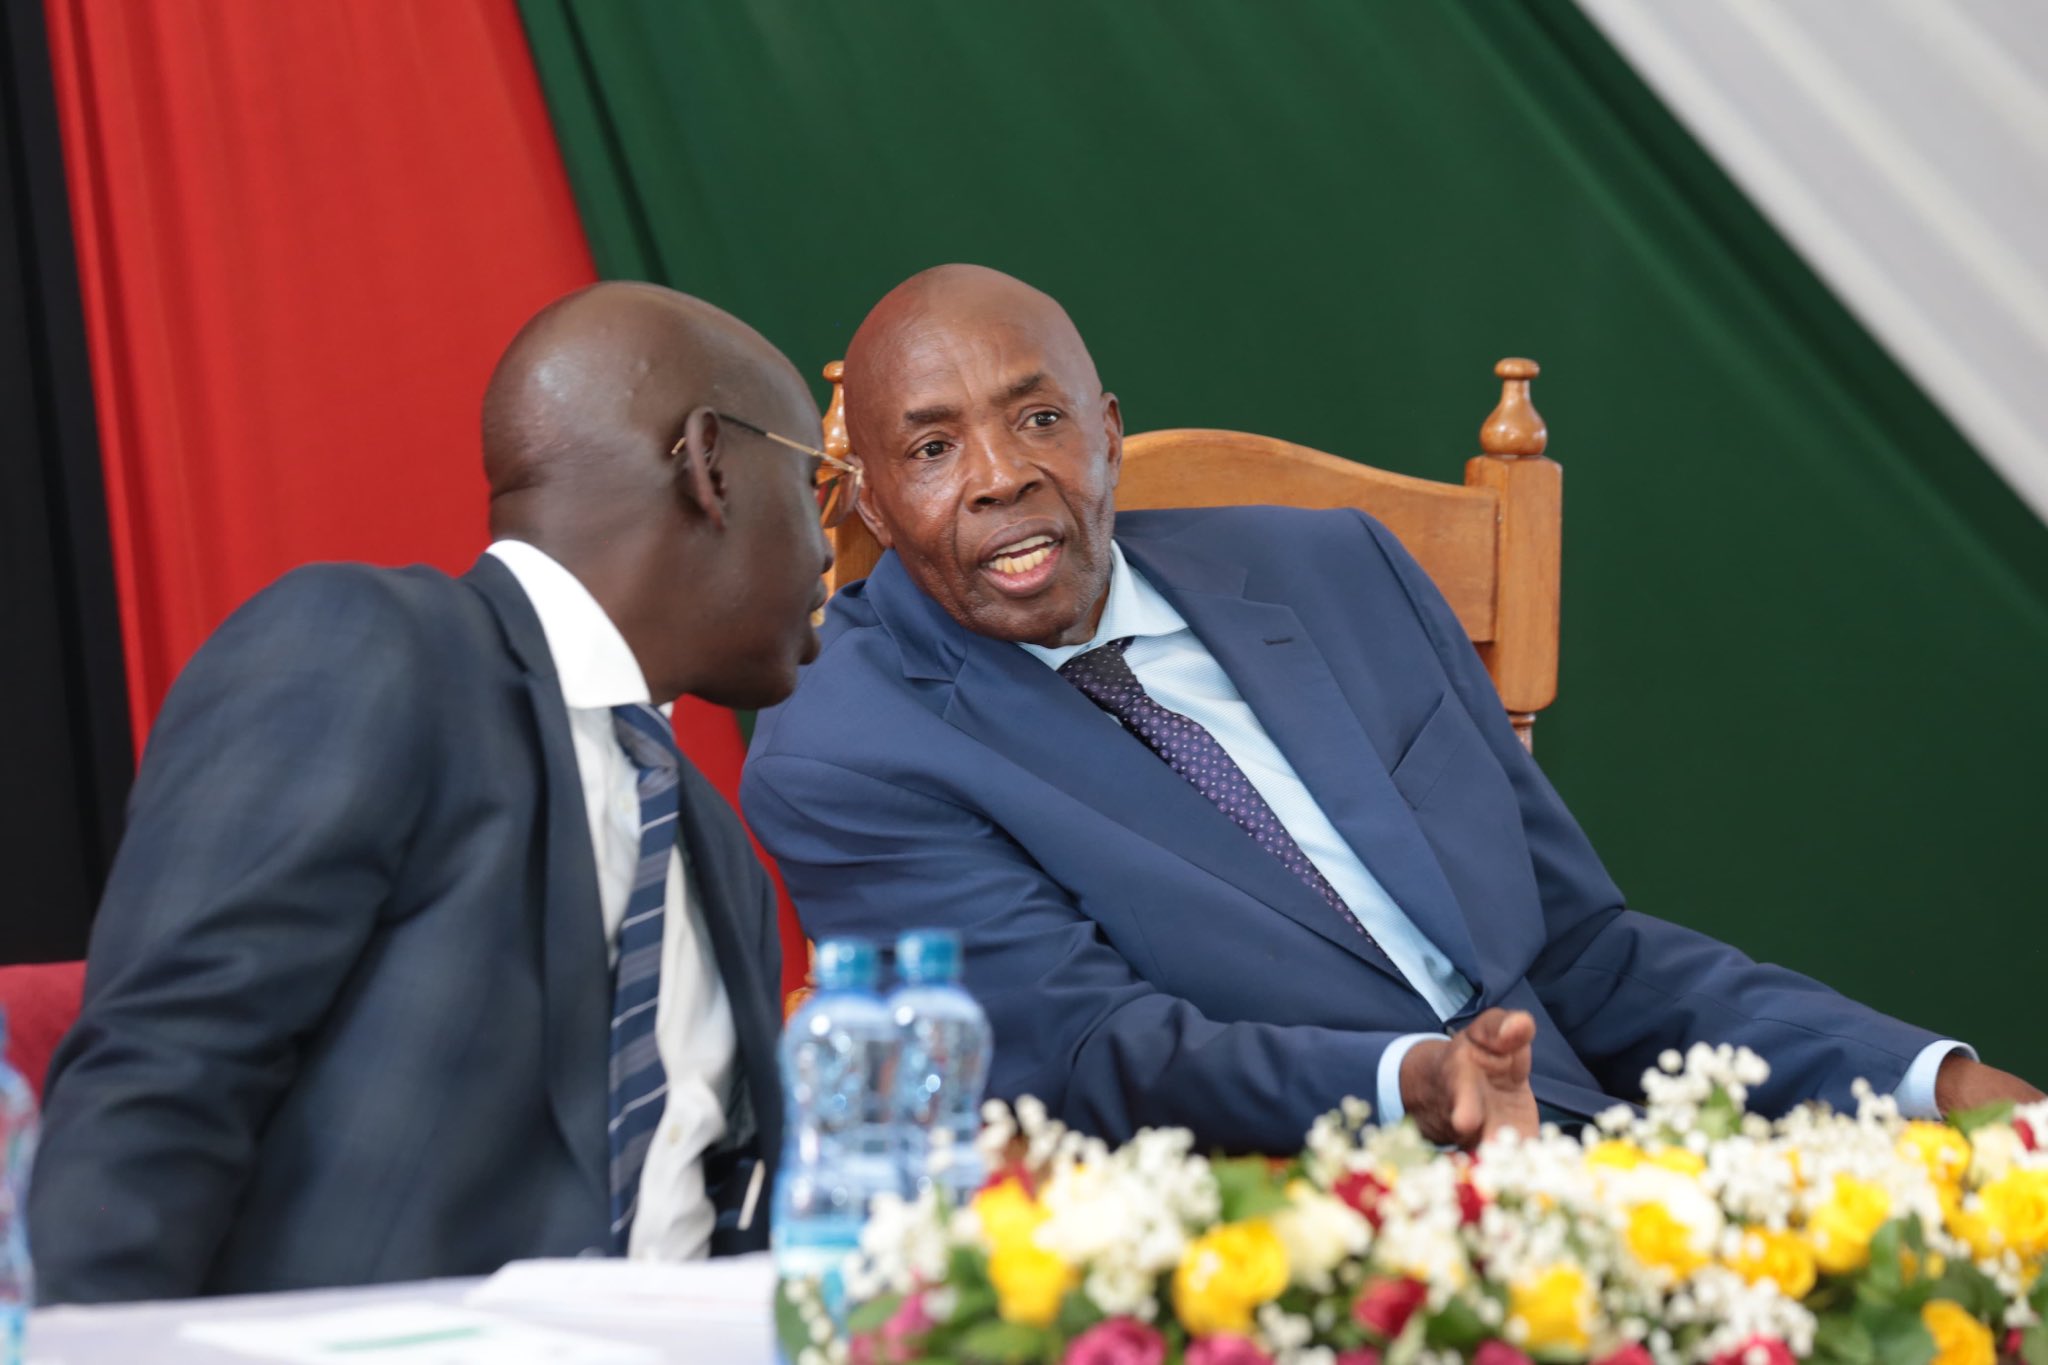 Education Cabinet Secretary Ezekiel Machogu (right) and Pricipal Secretary Belio Kipsang during the release of the 2023 KCSE exam results on January 8, 2023.